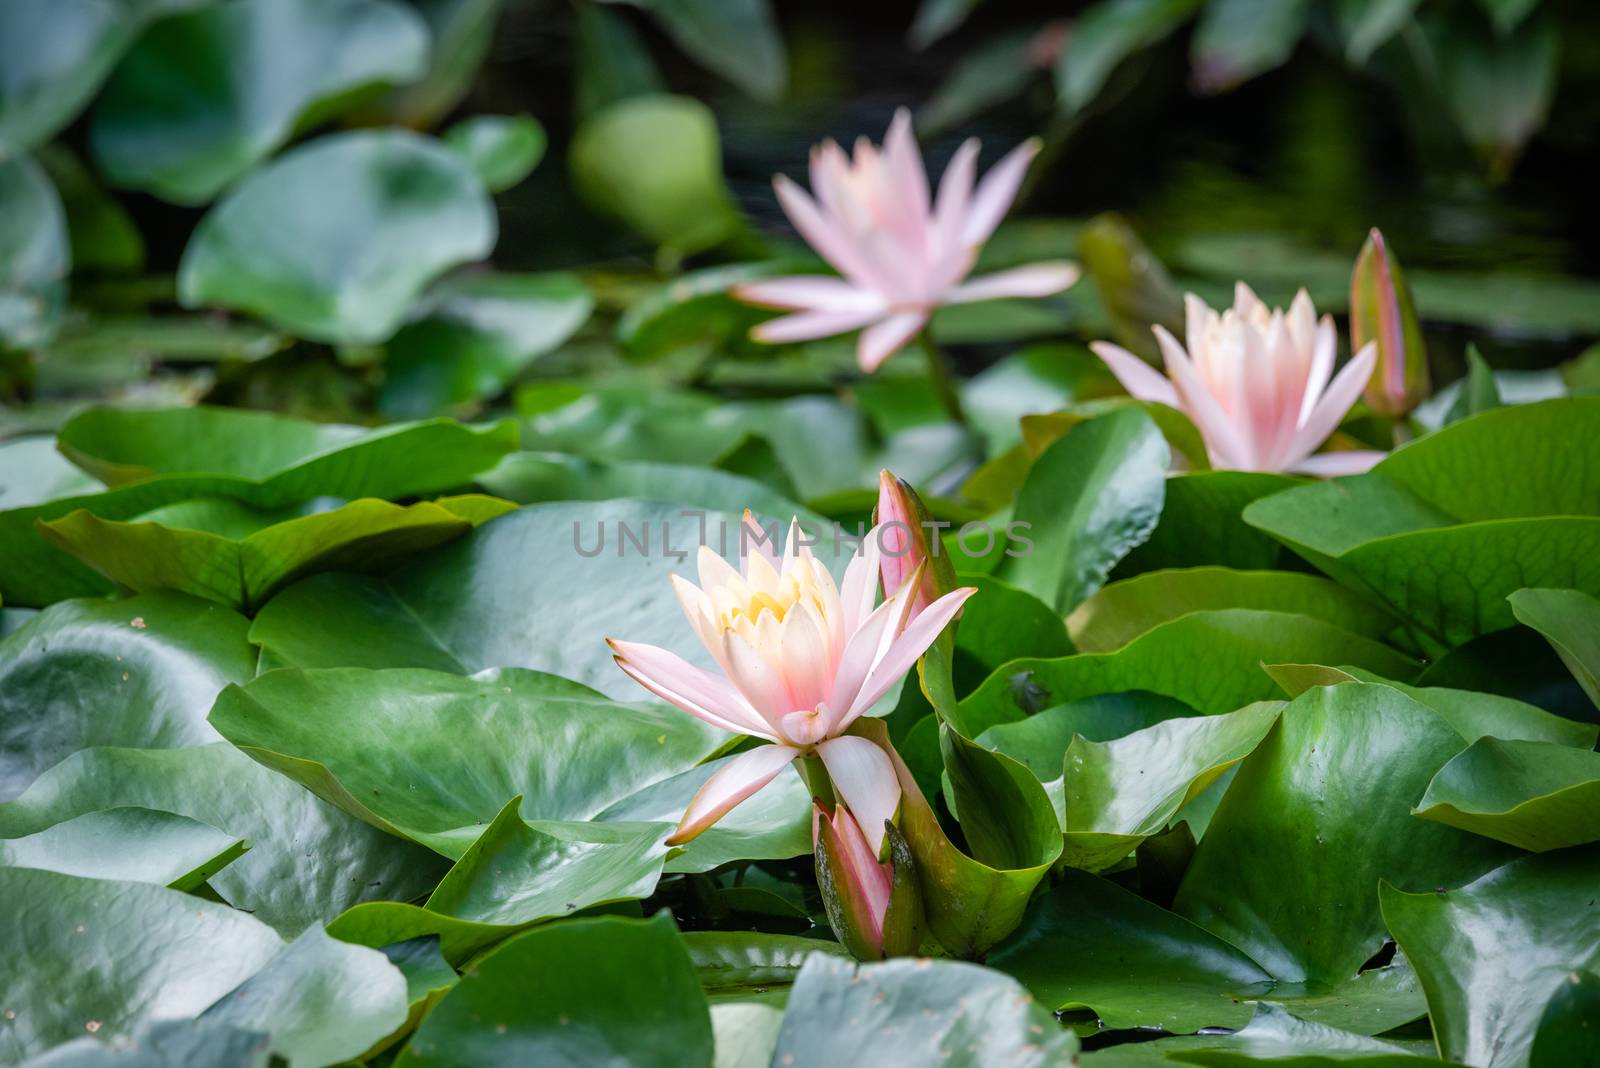 Lotus water lily and green leaves close-up view in a pond